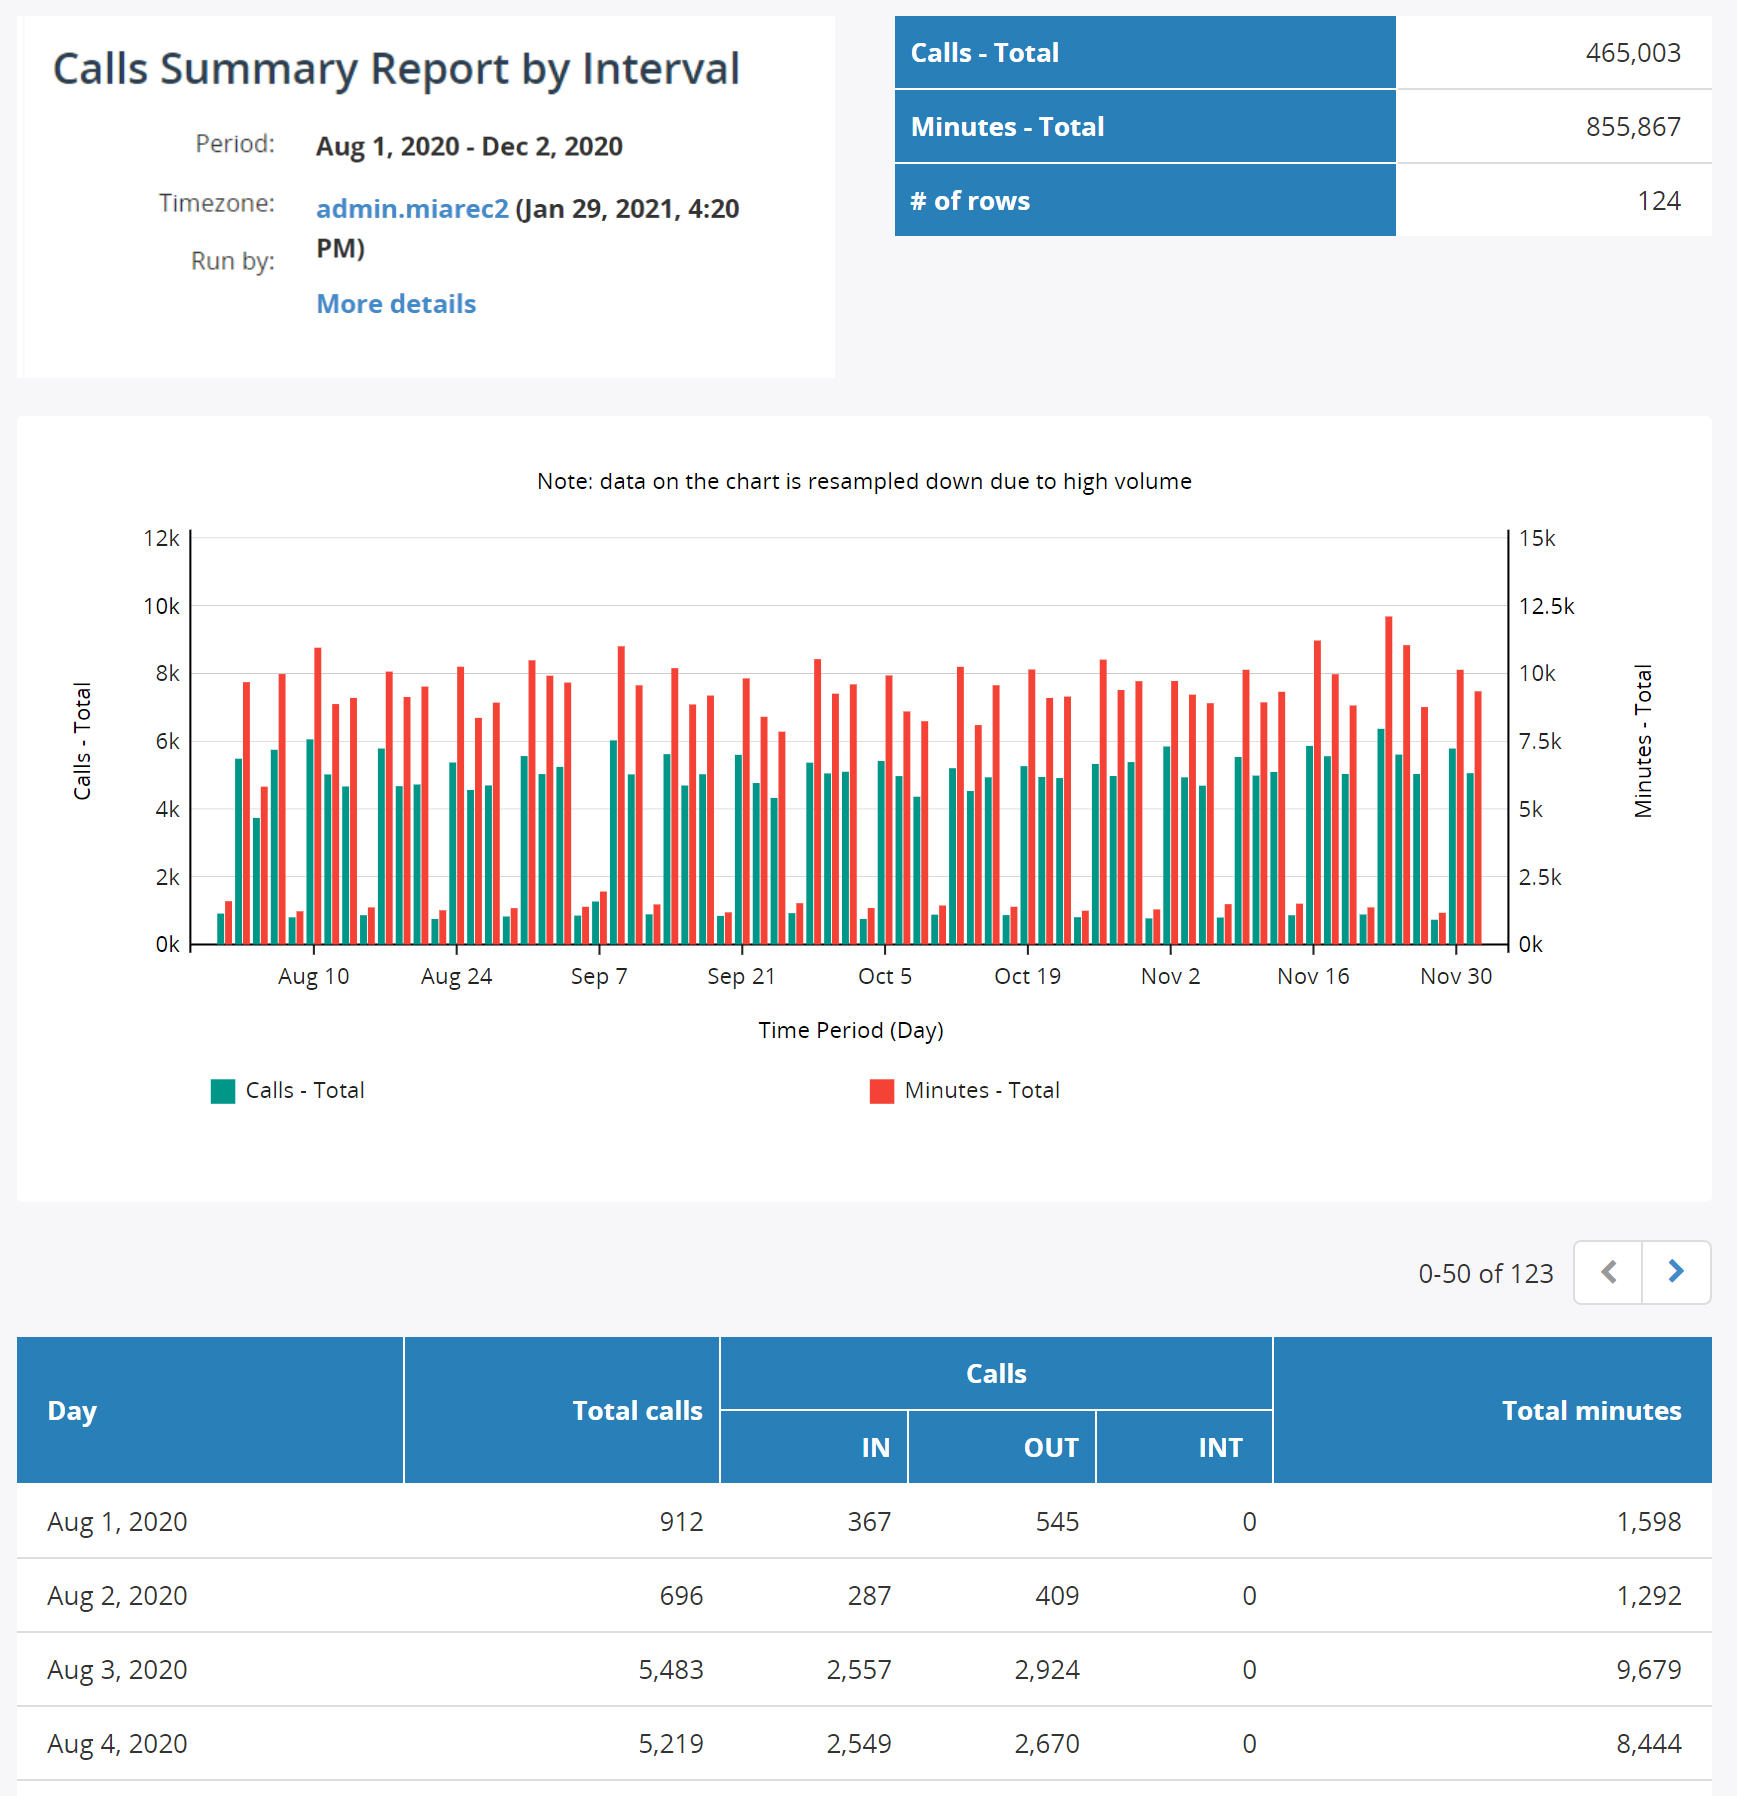 Calls Summary Report By Interval